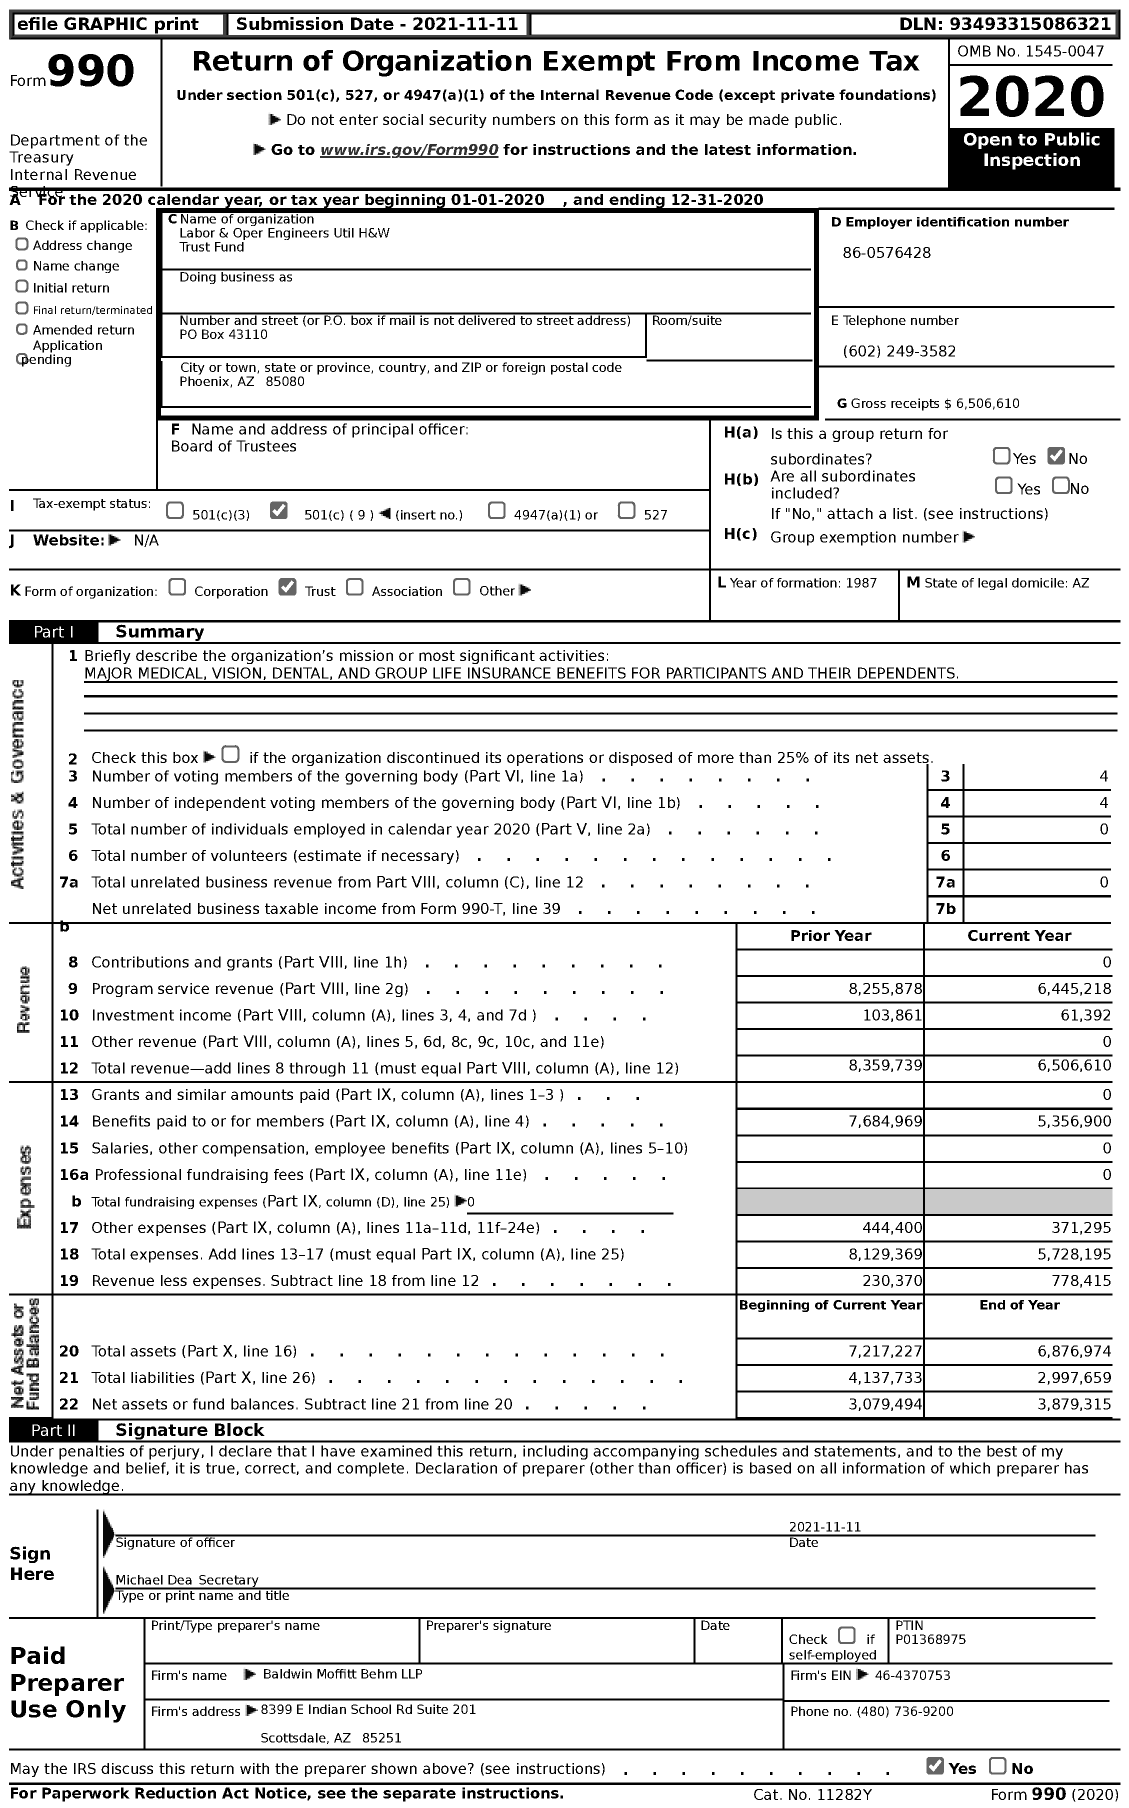 Image of first page of 2020 Form 990 for Laboreres & Oper Engineers Util H&W Trust Fund